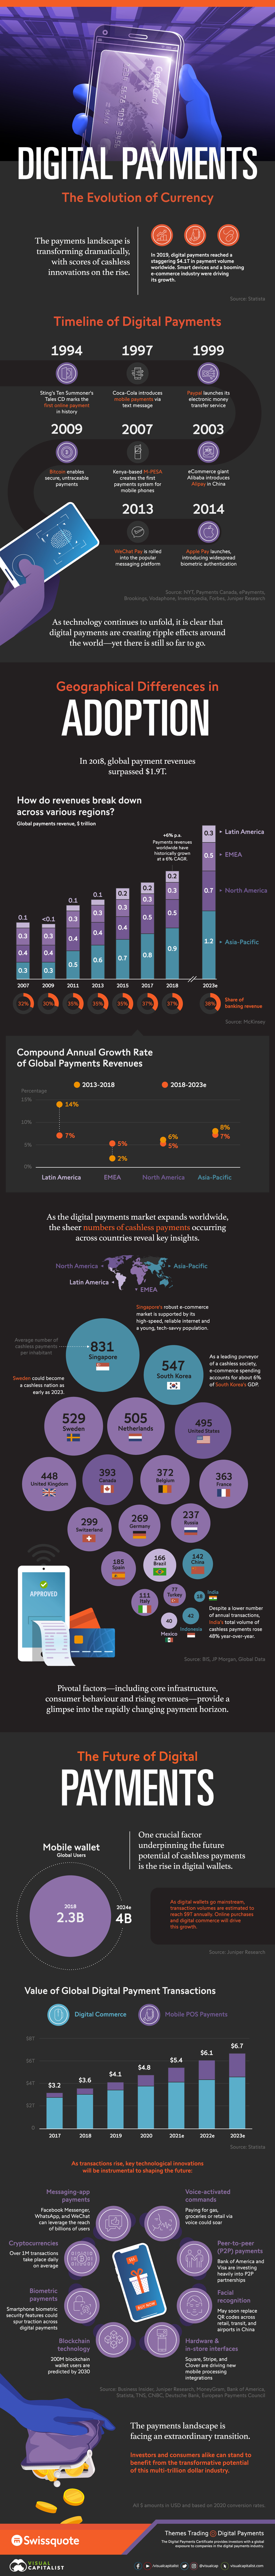 Digital Payments Infographic